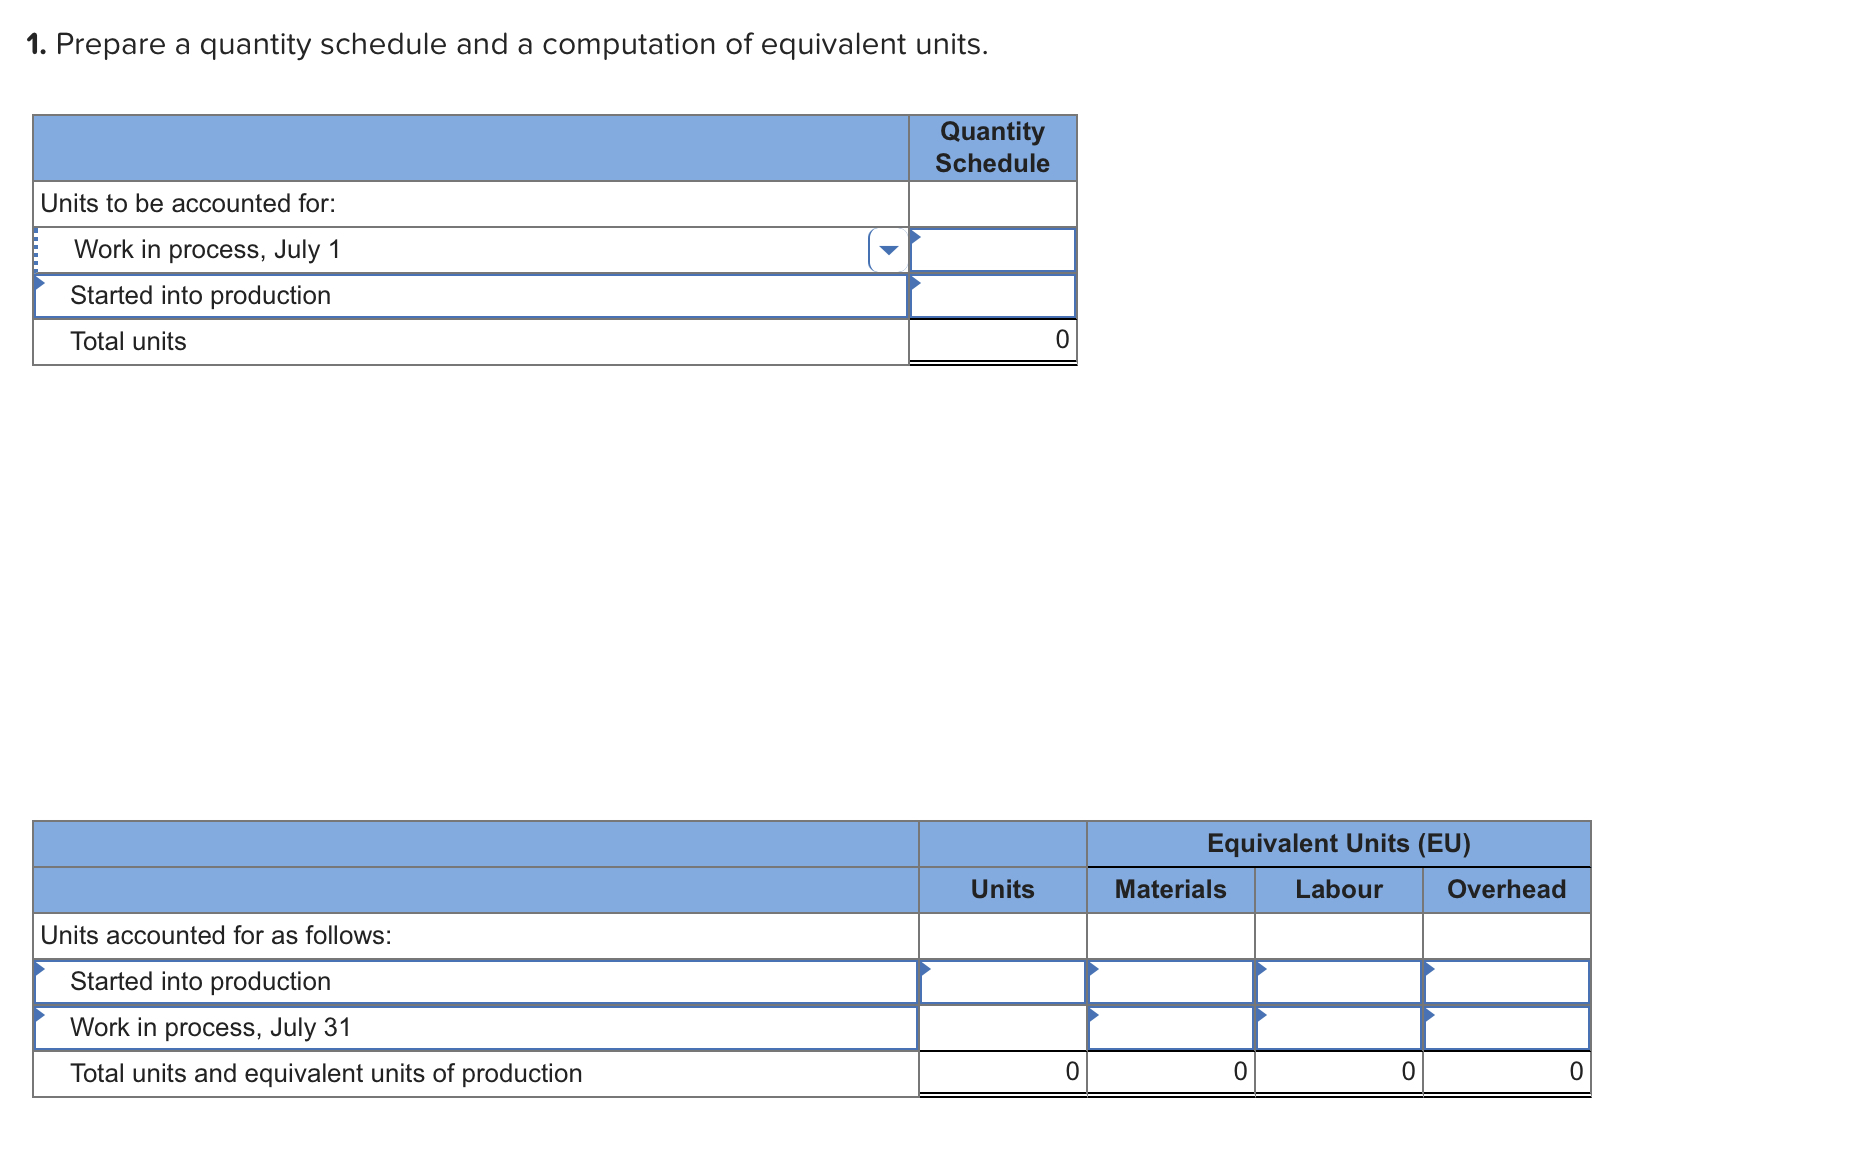 1. Prepare a quantity schedule and a computation of equivalent units. Units to be accounted for: Work in